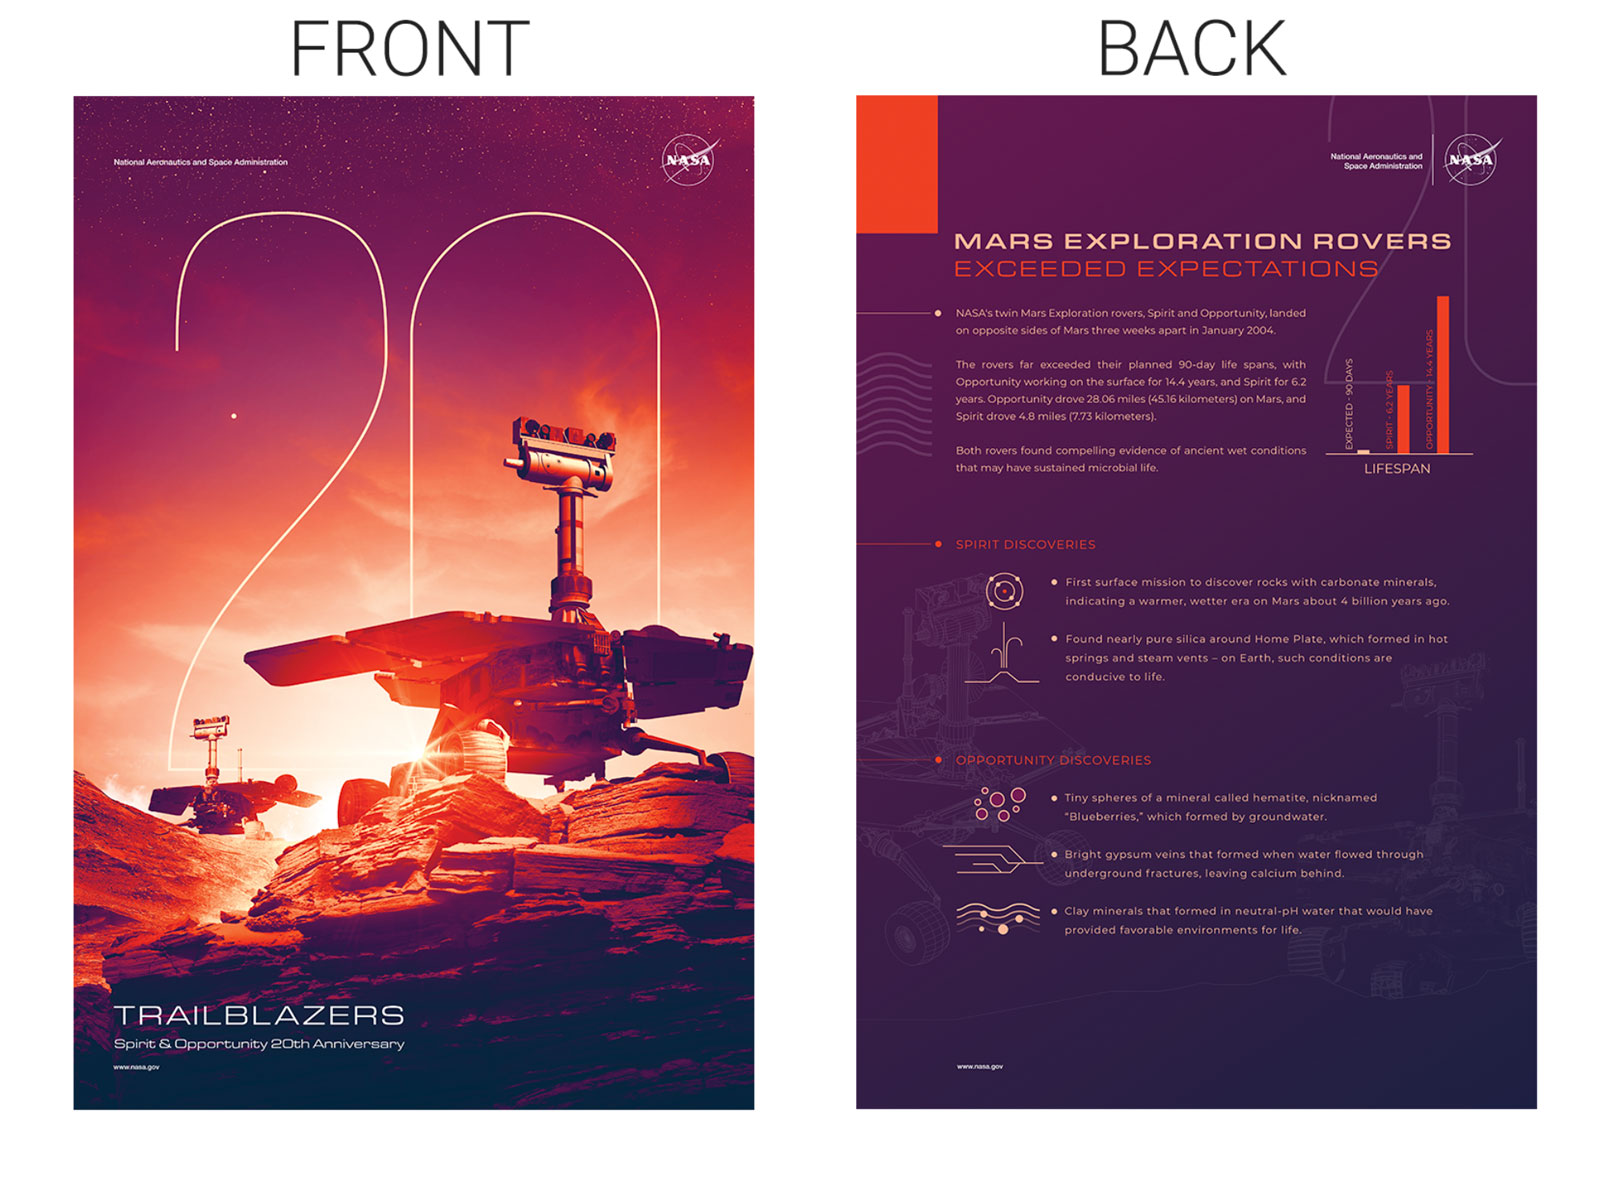 On the 20th anniversary of the landing of Spirit and Opportunity, celebrate NASA’s Mars Exploration Rover Project with this two-sided poster.